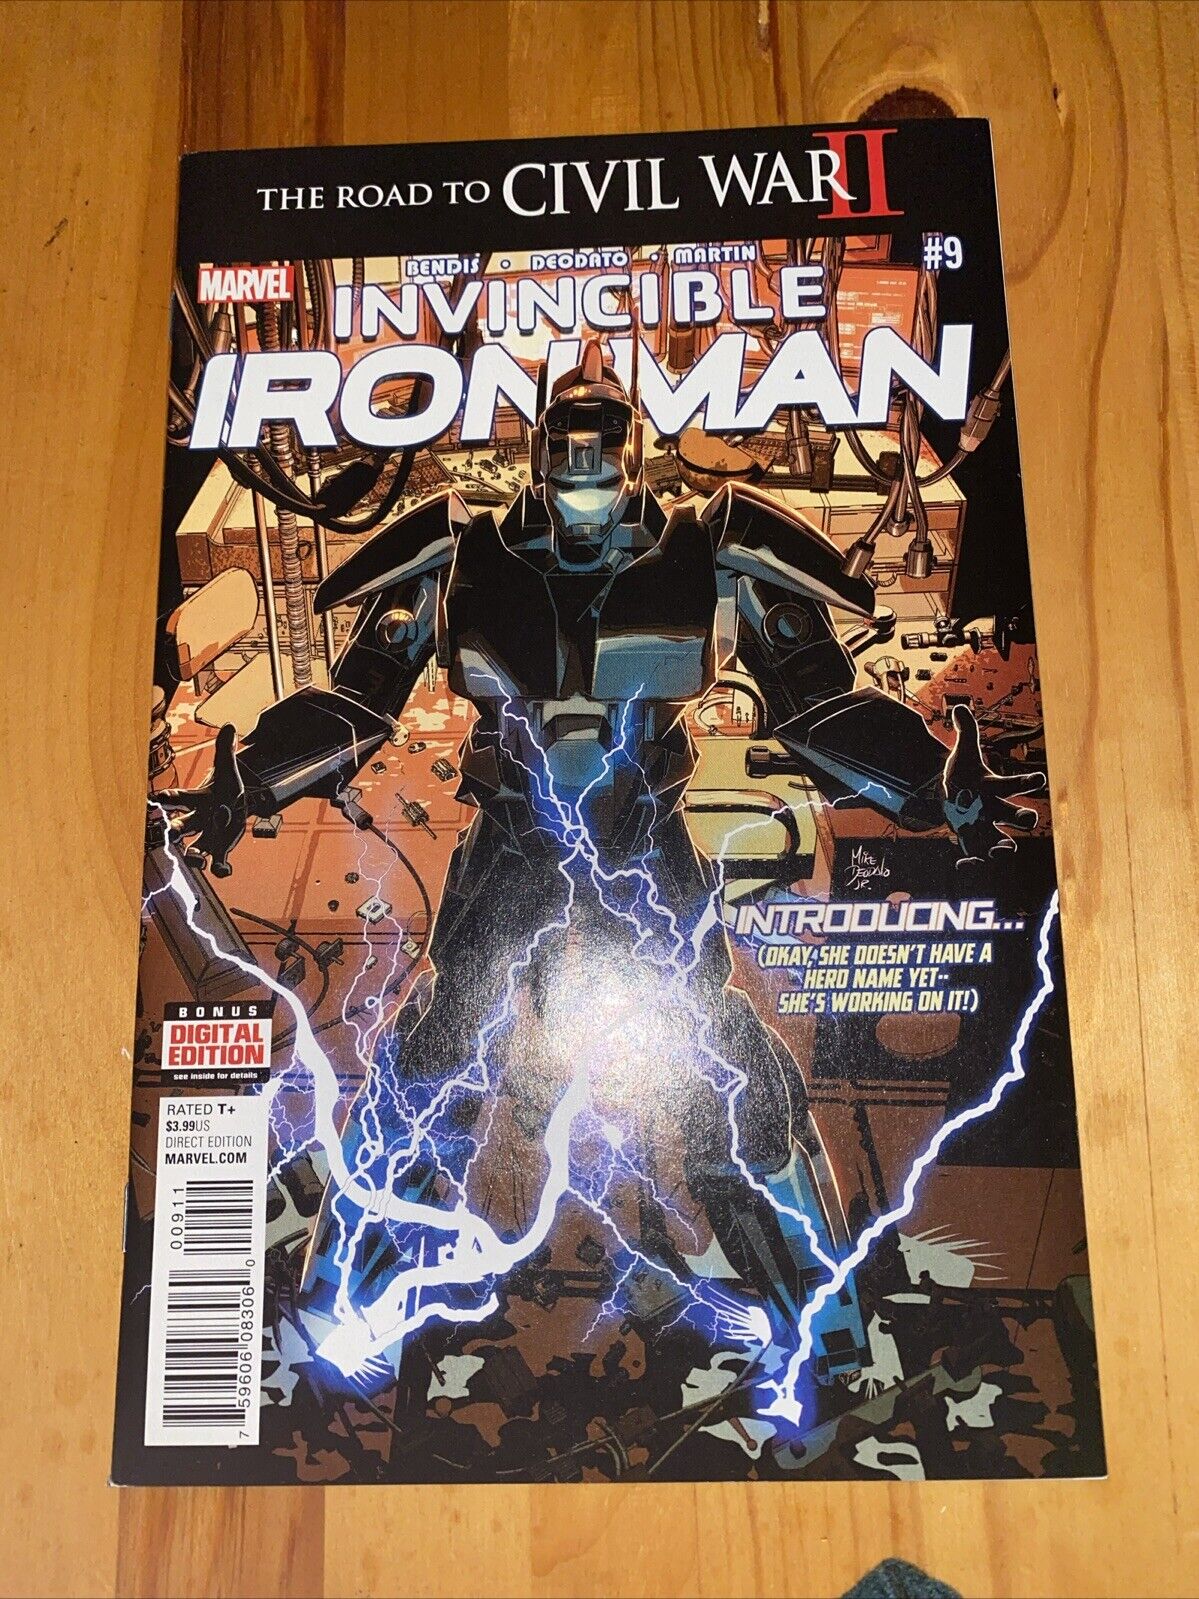 Invincible Iron Man Vol 3 Issue 9 1st Print 1st full appearance of Riri Williams